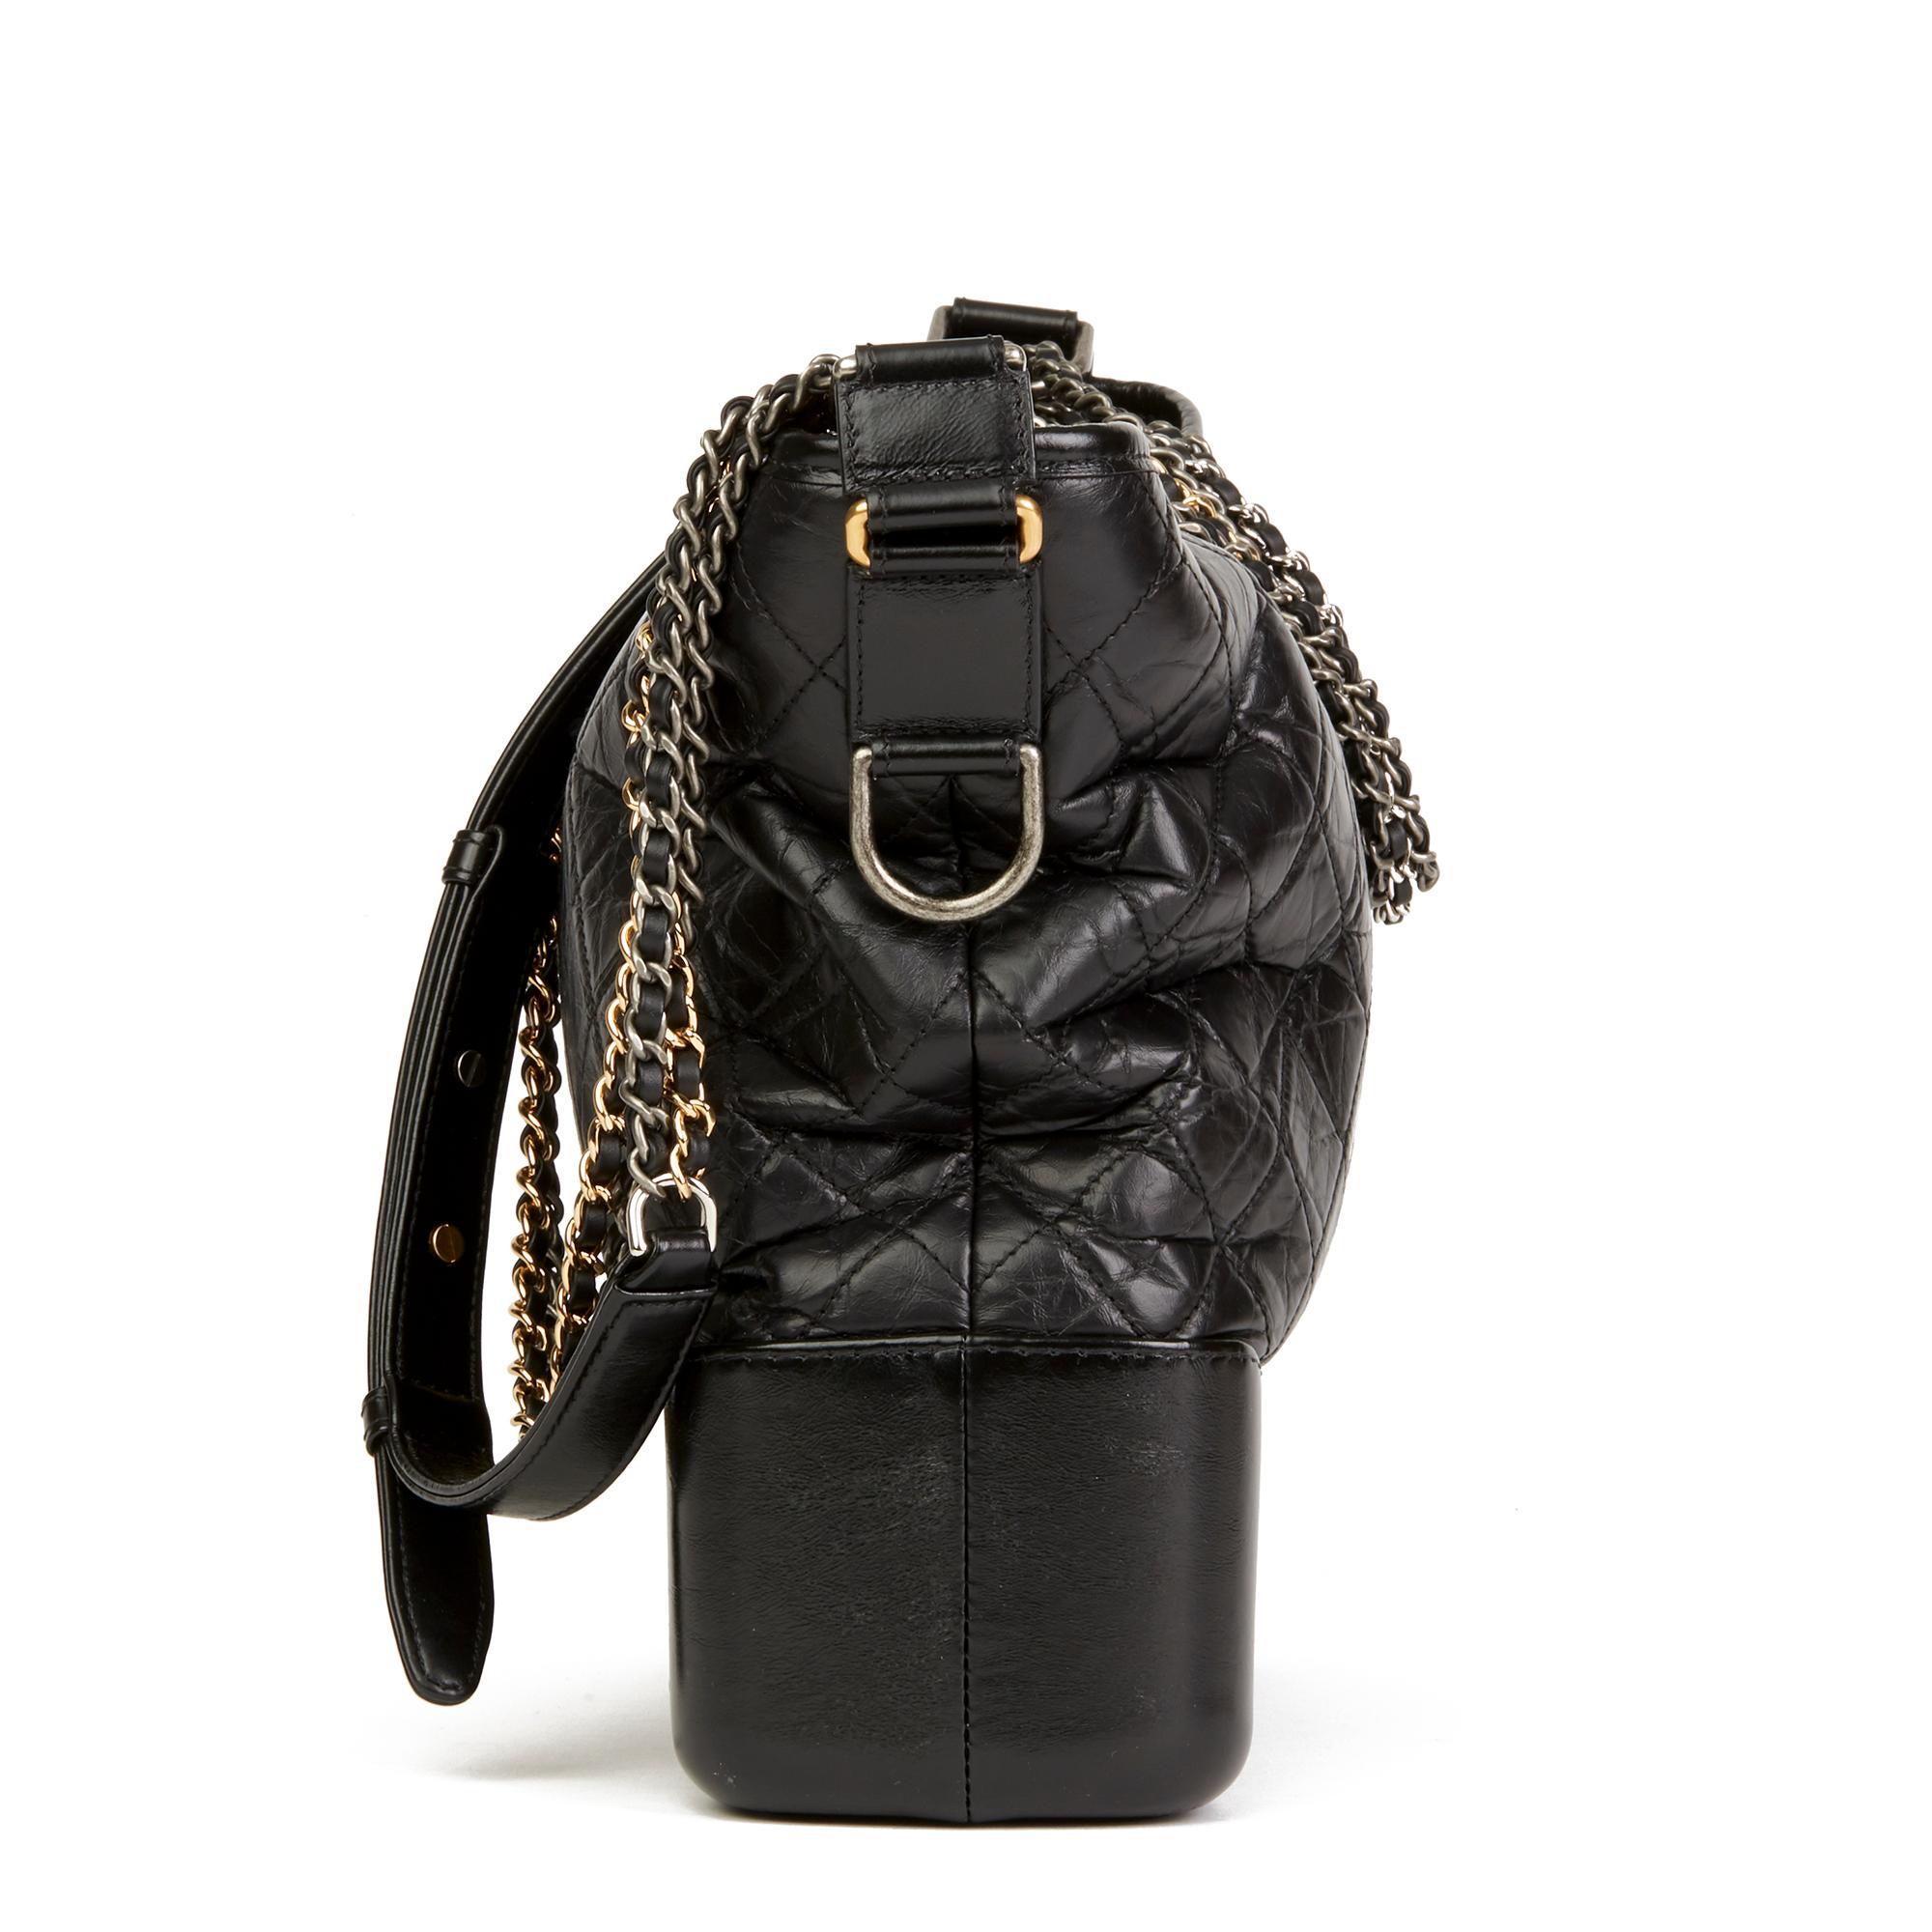 2017 Chanel Black Quilted Aged Calfskin Leather Large Gabrielle Hobo Bag In Excellent Condition In Bishop's Stortford, Hertfordshire